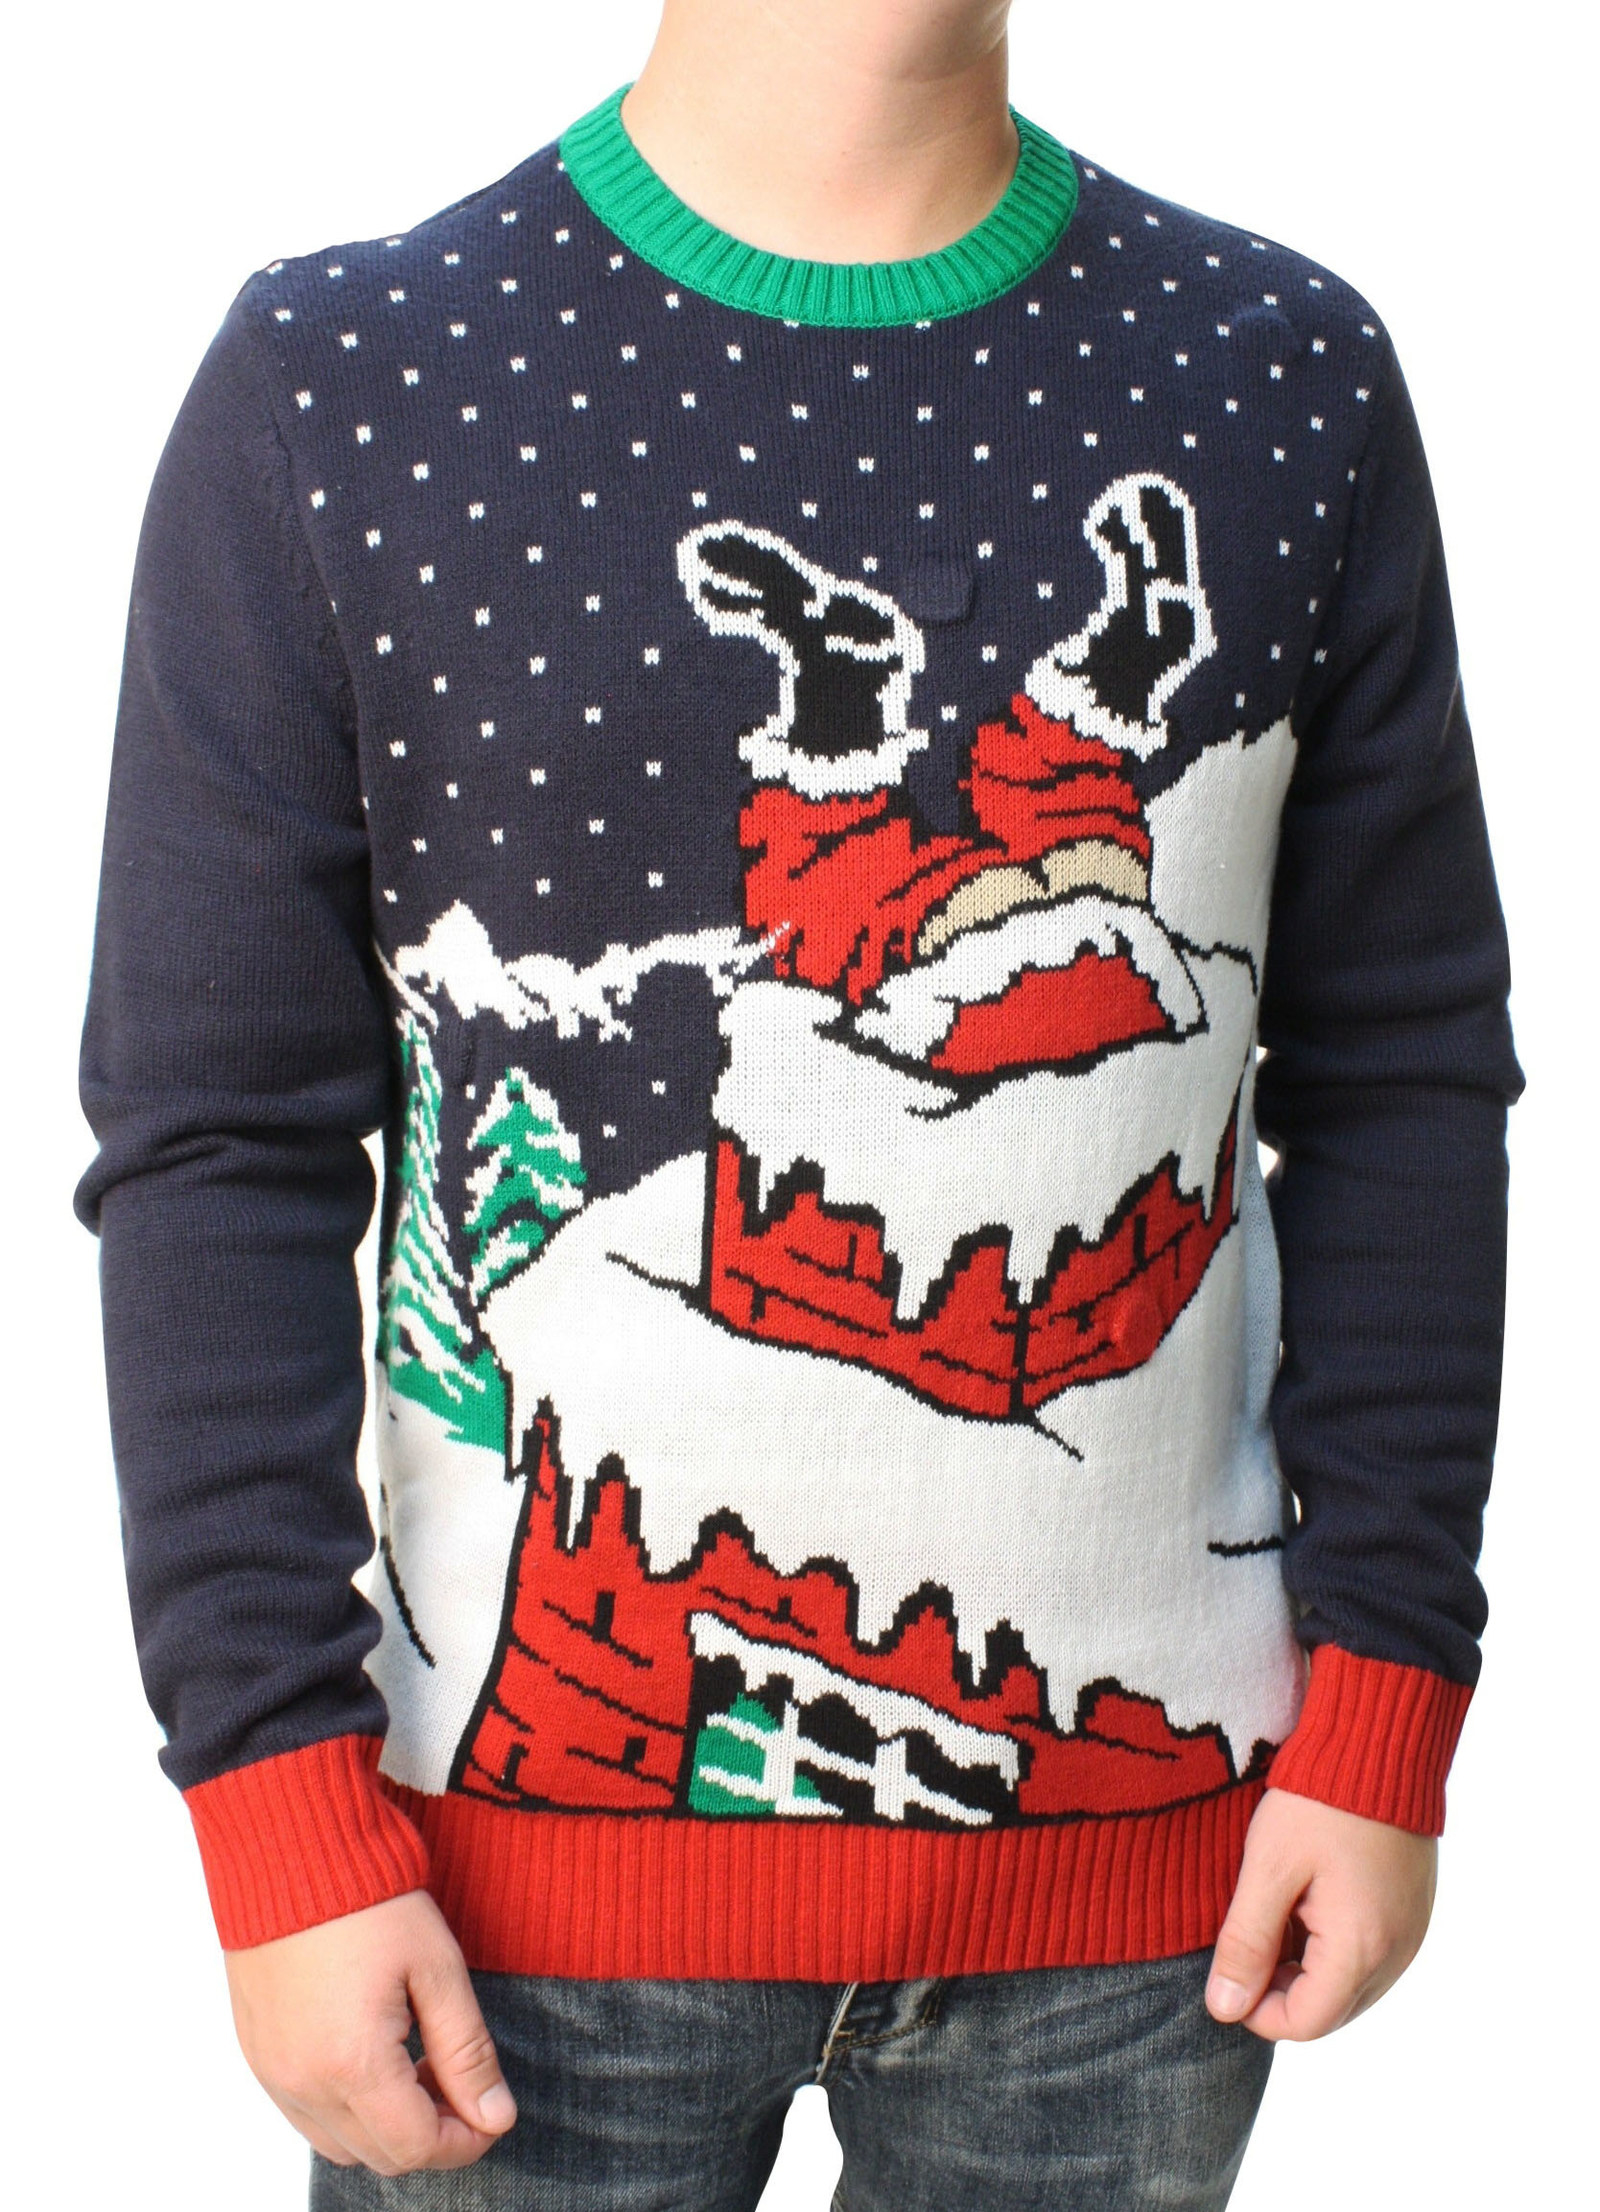 43 Of The Most Gloriously Ugly Christmas Sweaters You've Ever Seen